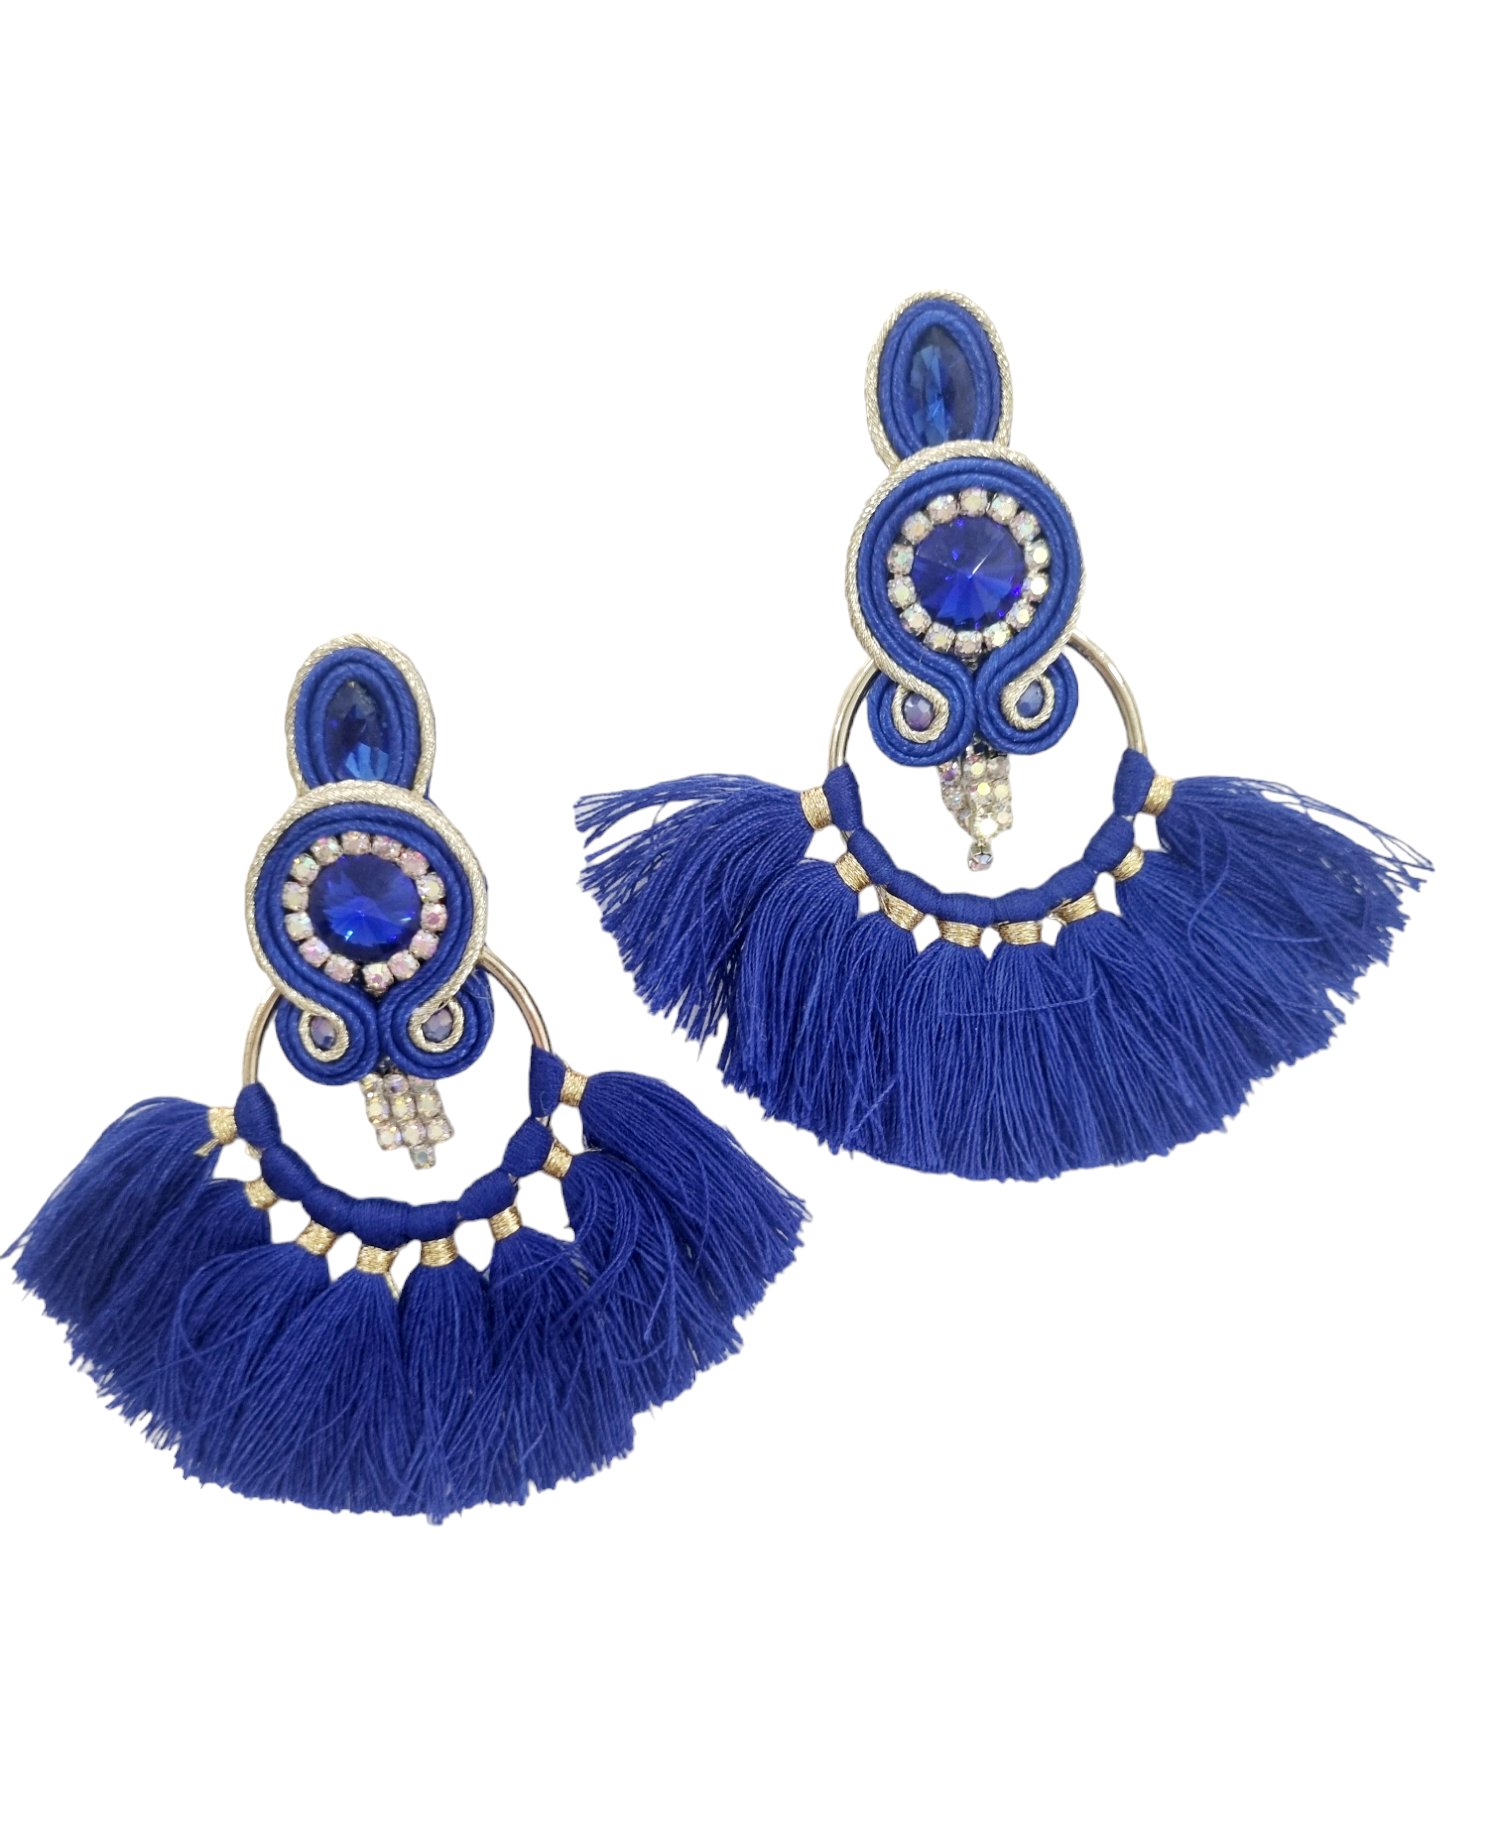 Earrings made with soutache technique, rhinestones and tassels. Length 7.5cm Weight 6.6gr